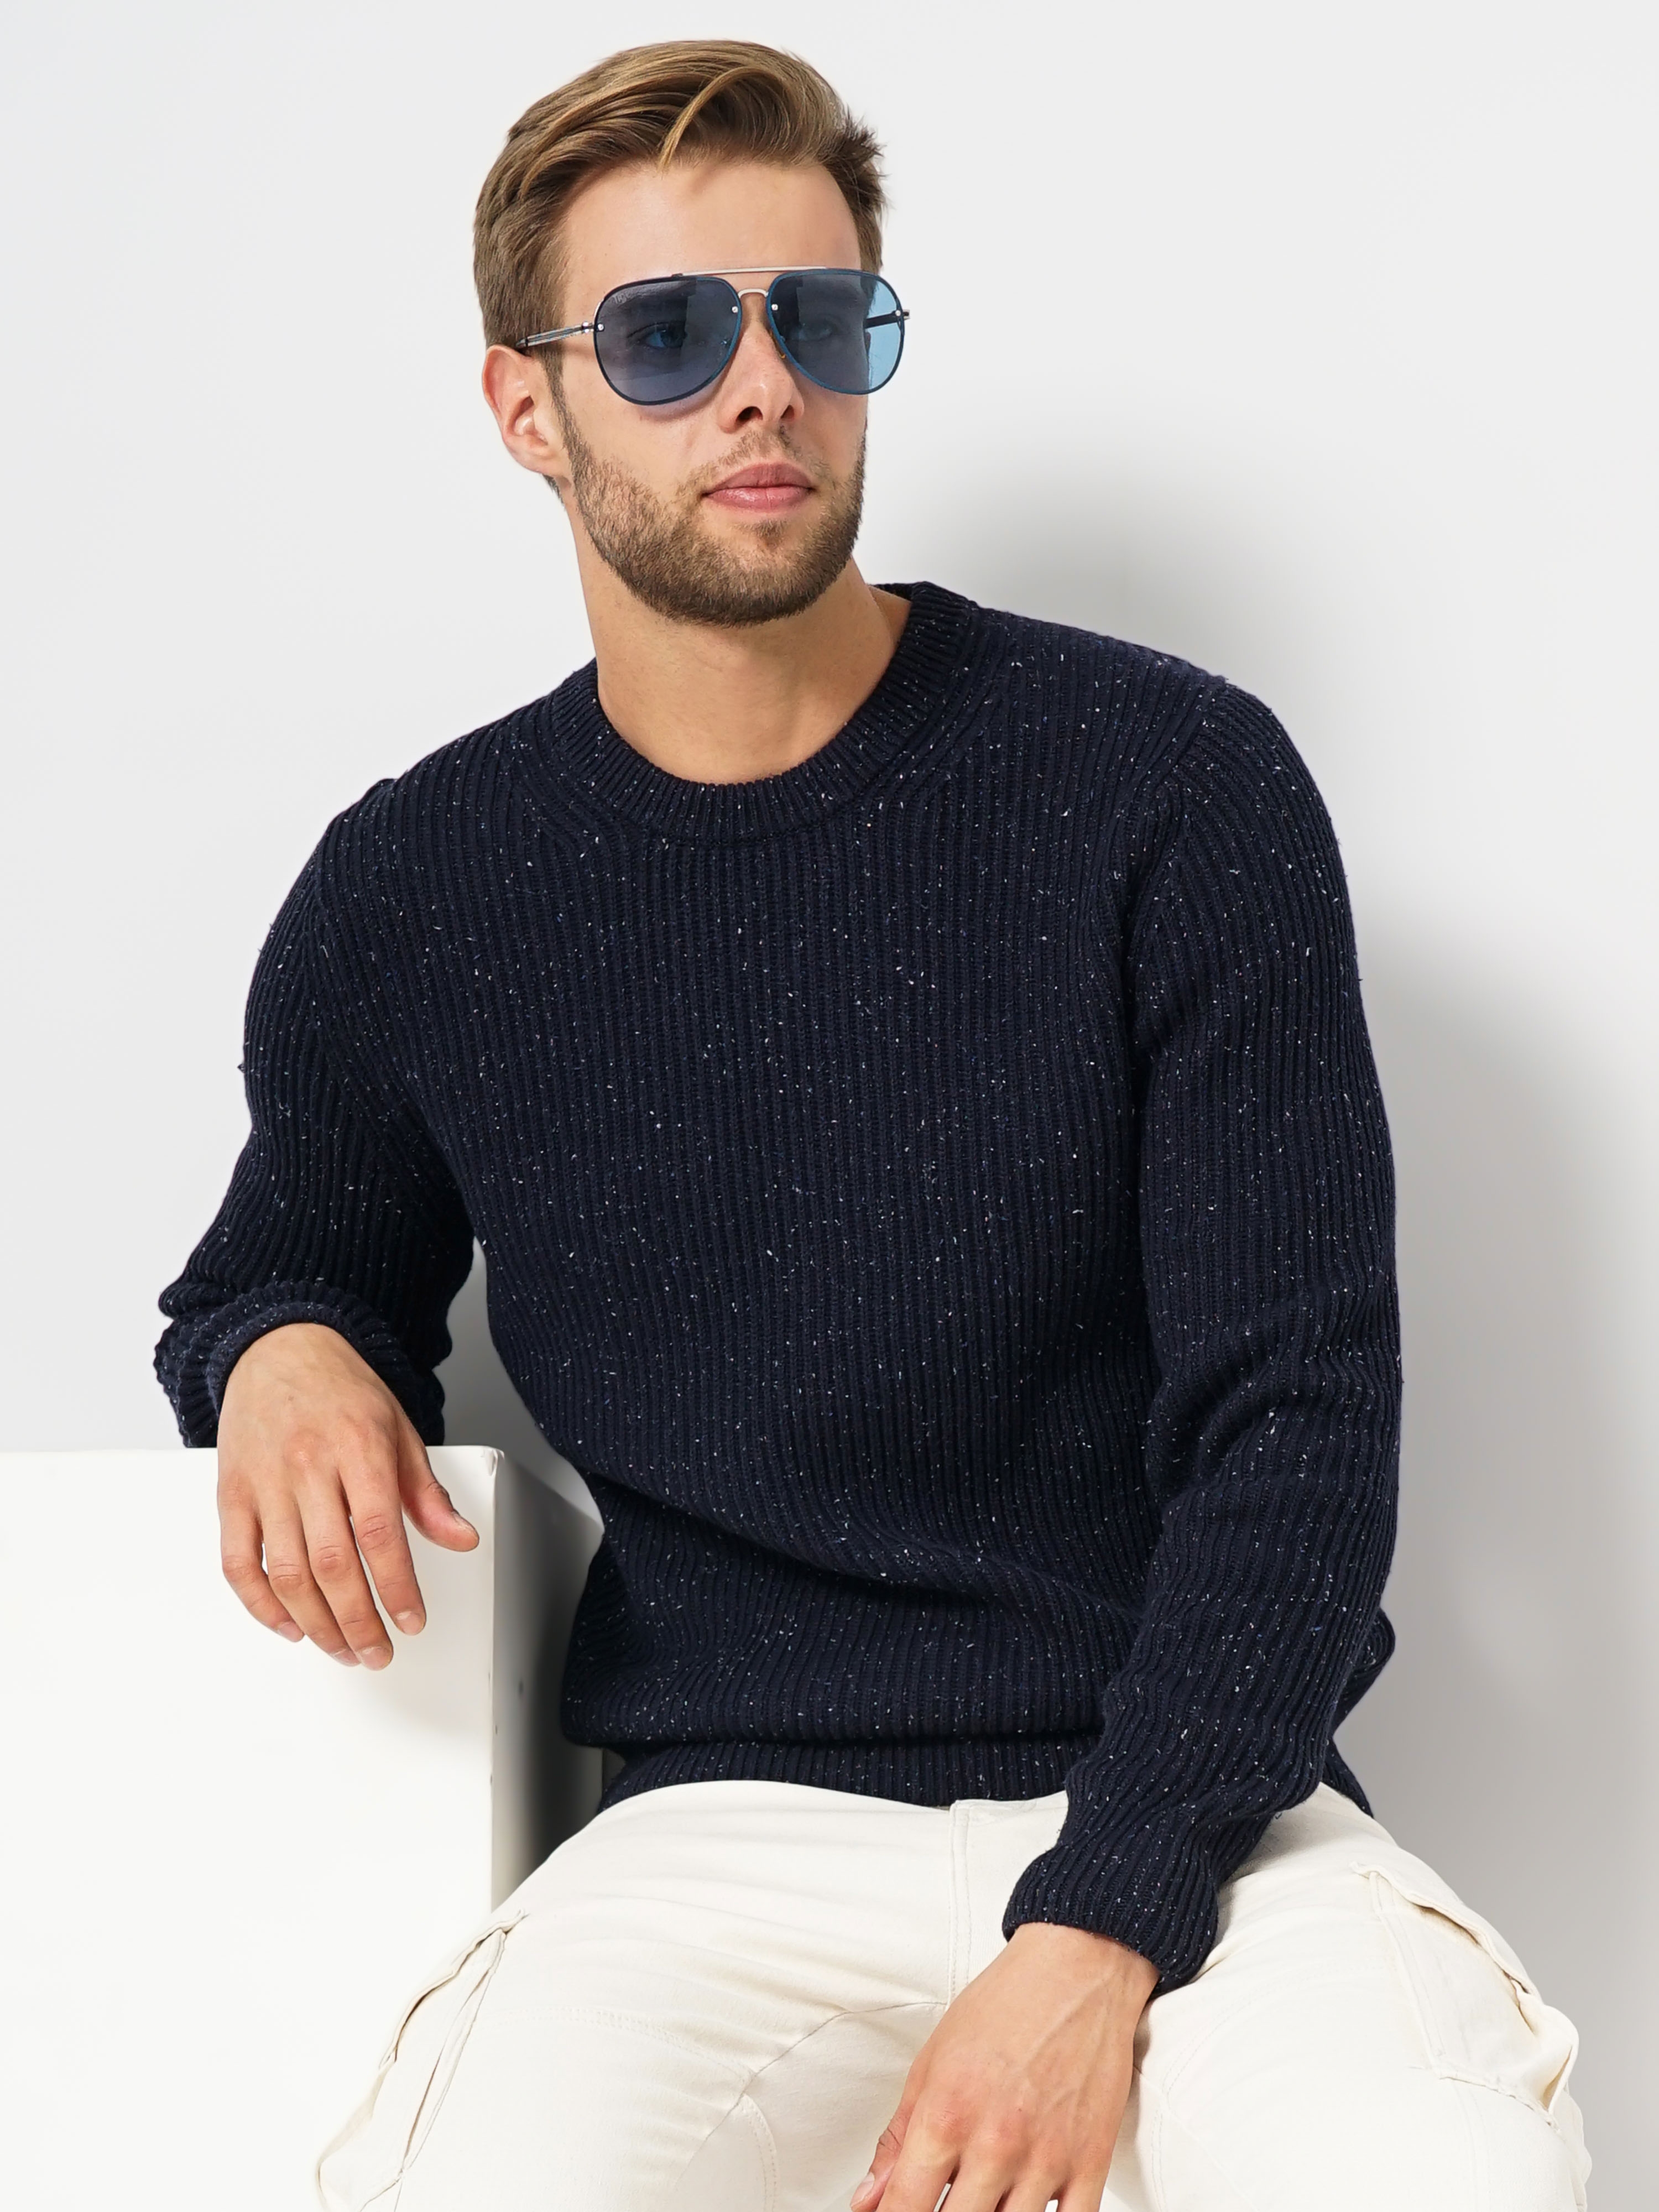 Men's Blue Knitted Sweaters